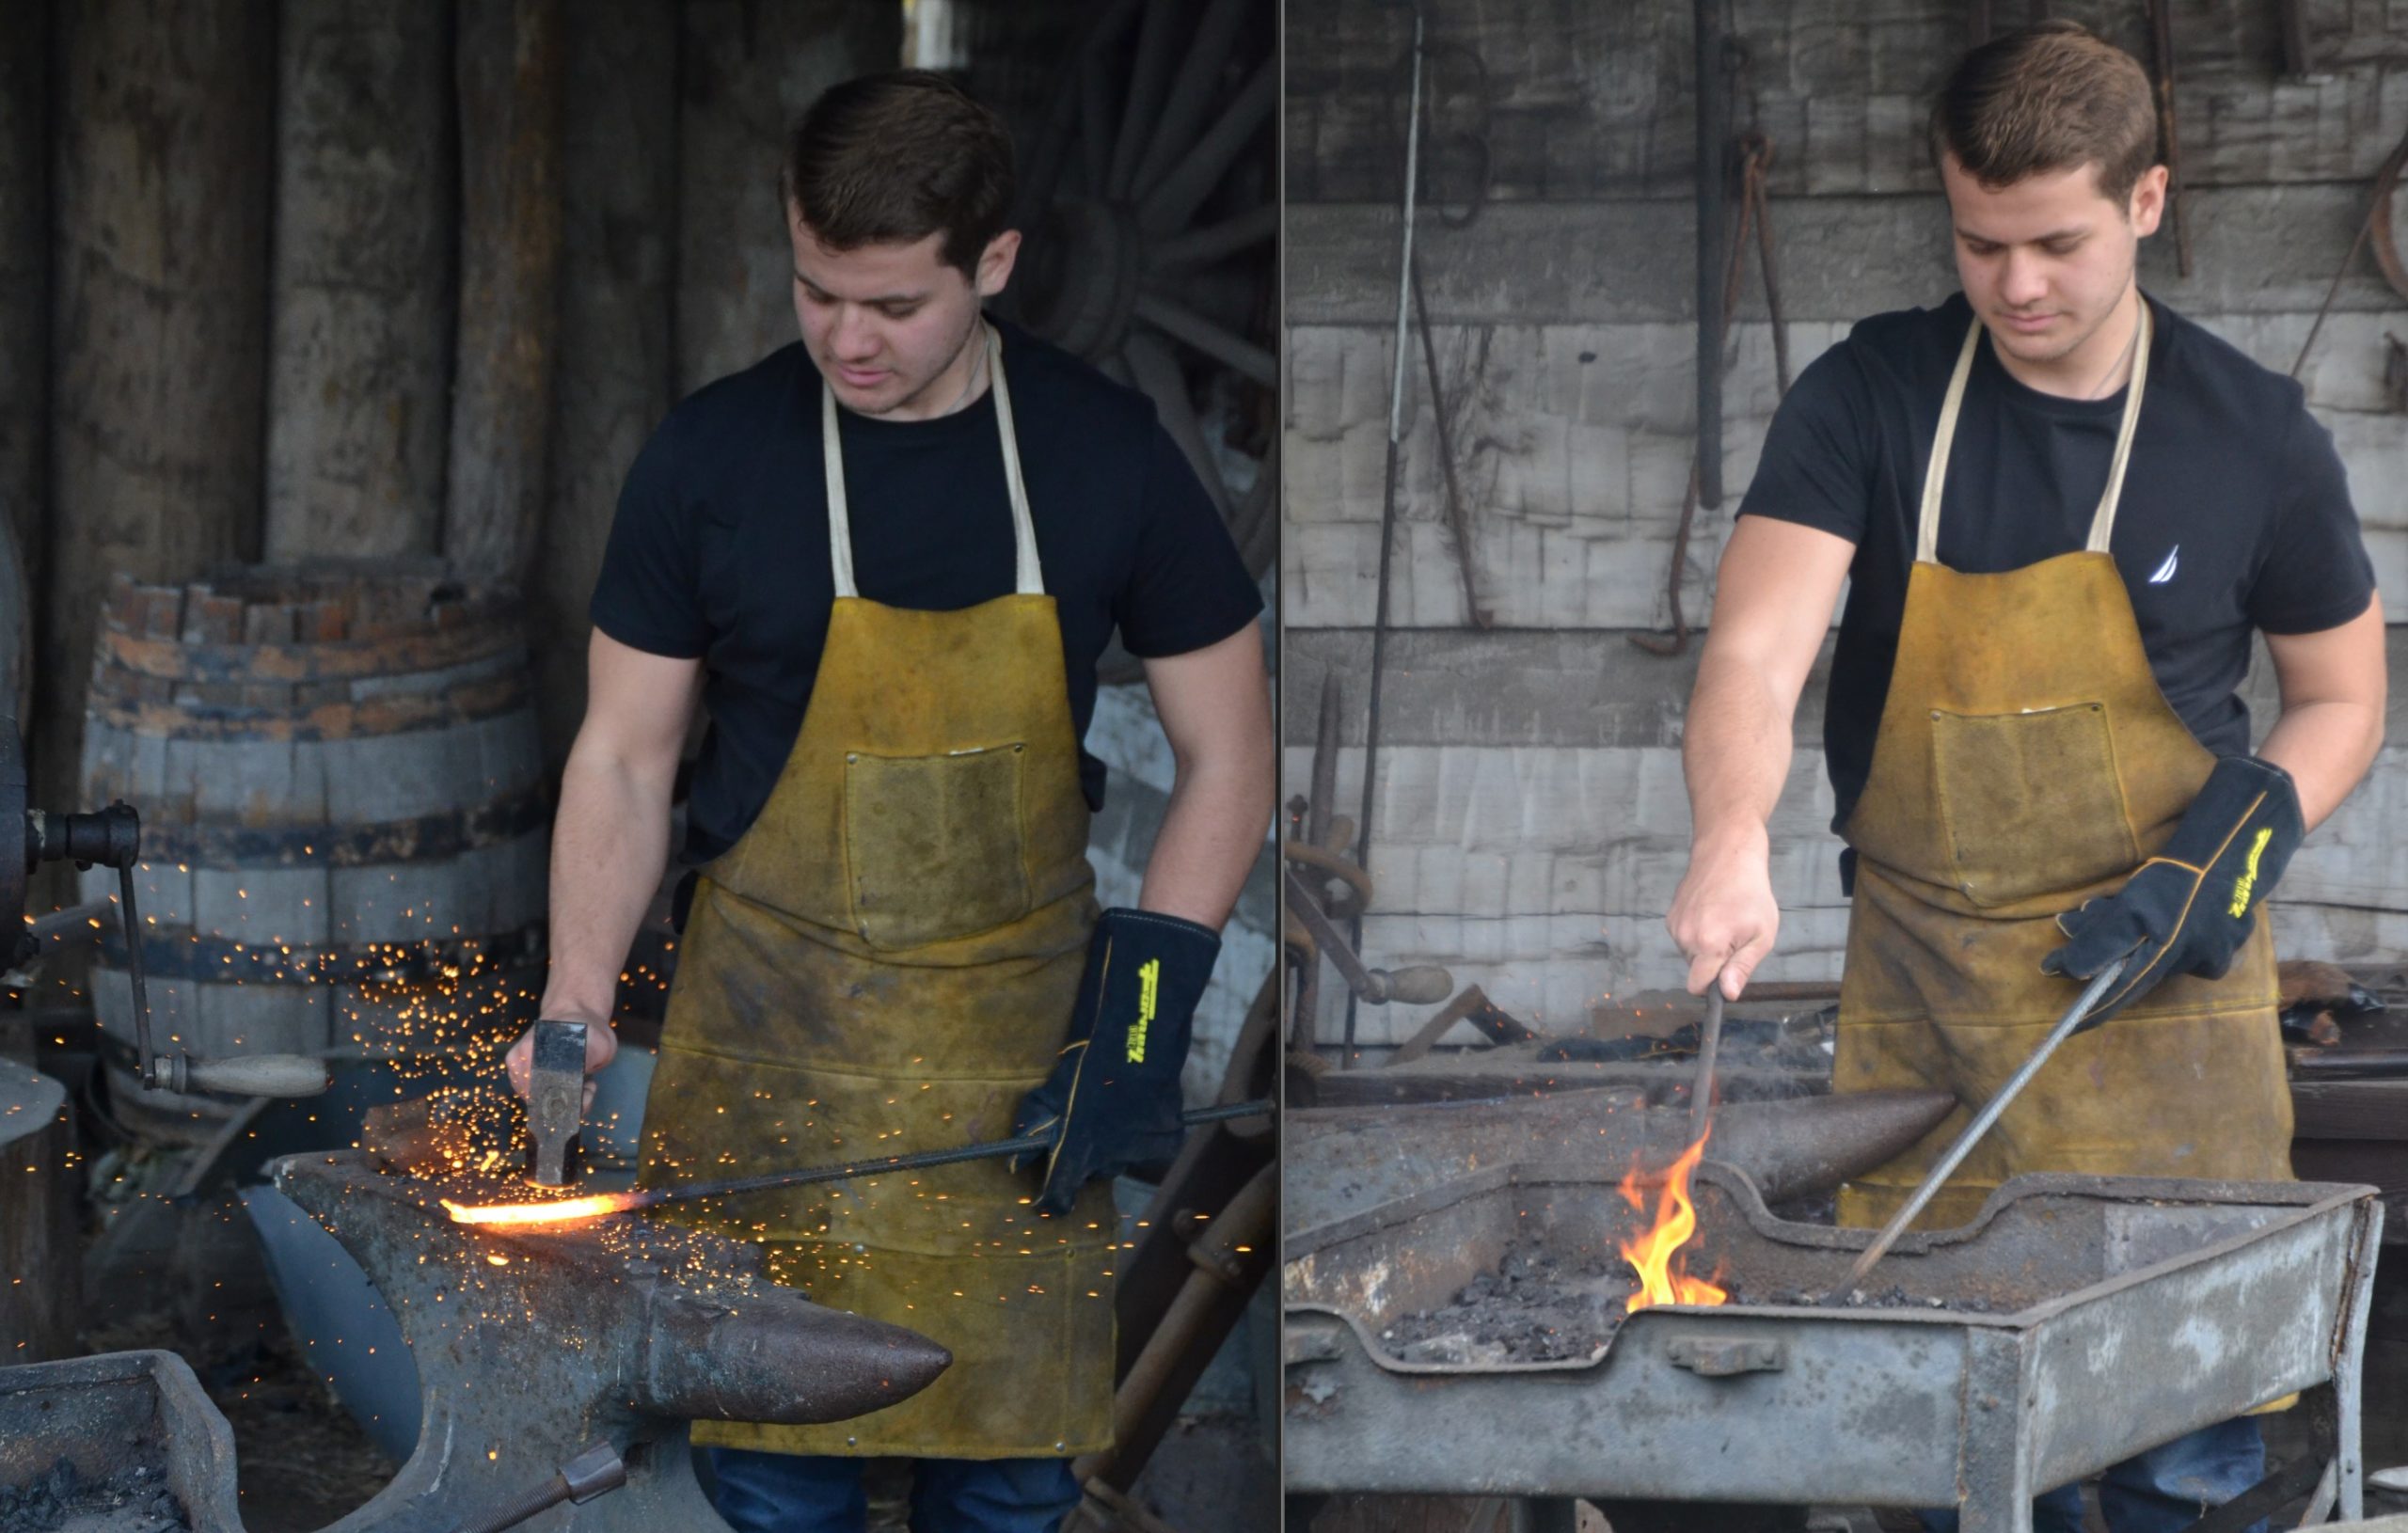 Blacksmithing at the Library with Columbia Fire & Iron – Spokane